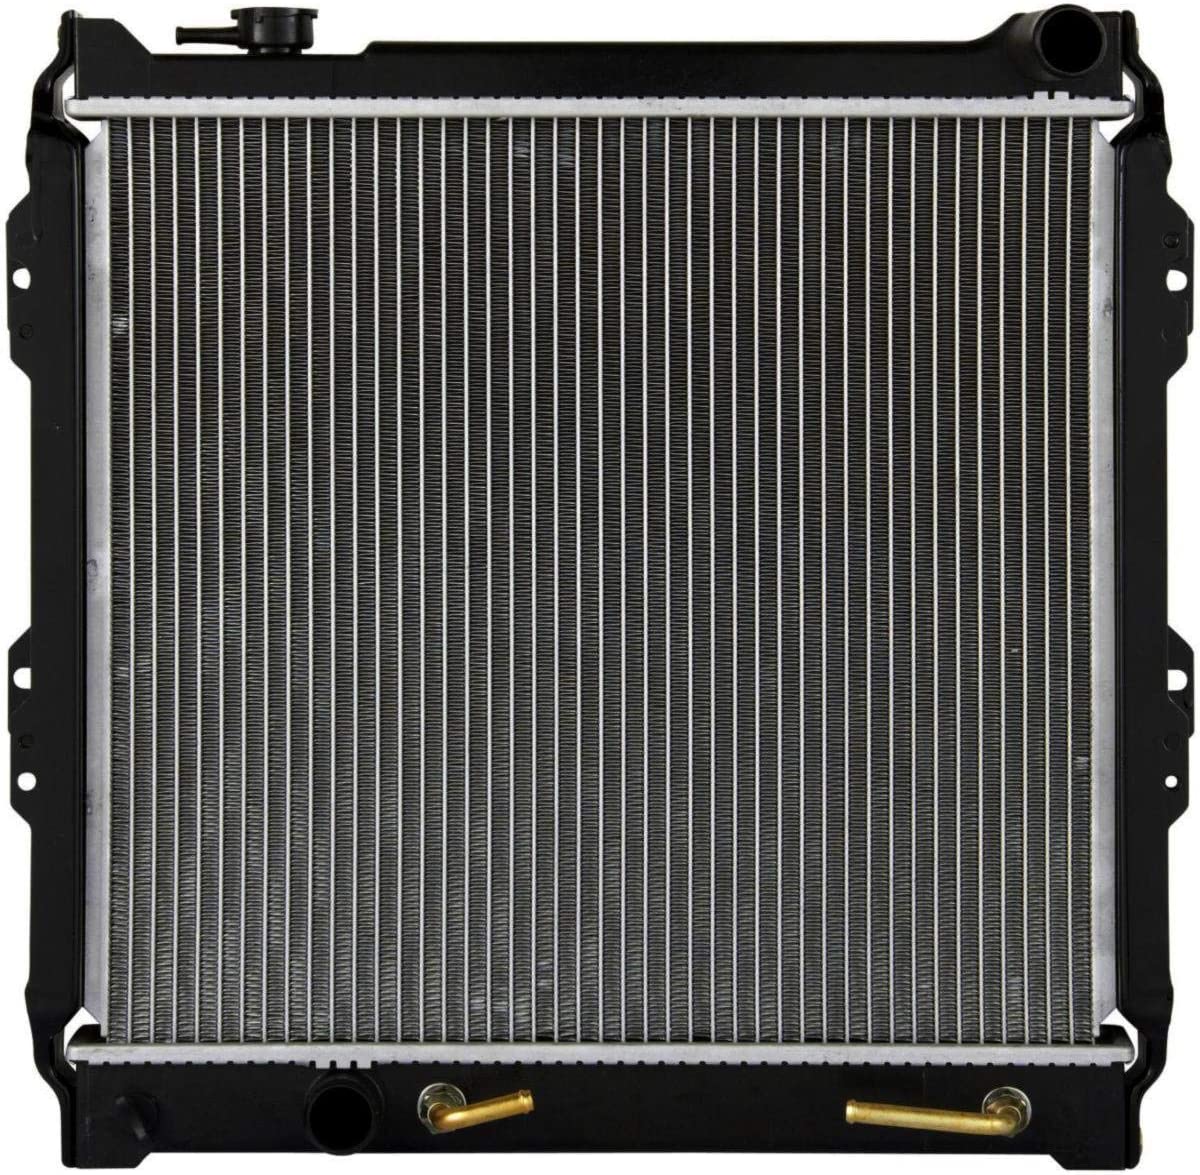 RADE Auto Aluminum Core Radiator Compatible with 1988-1988 4Runner 3.0L 1988-1995 Pickup 3.0L V6 with Oil Cooler With Warranty